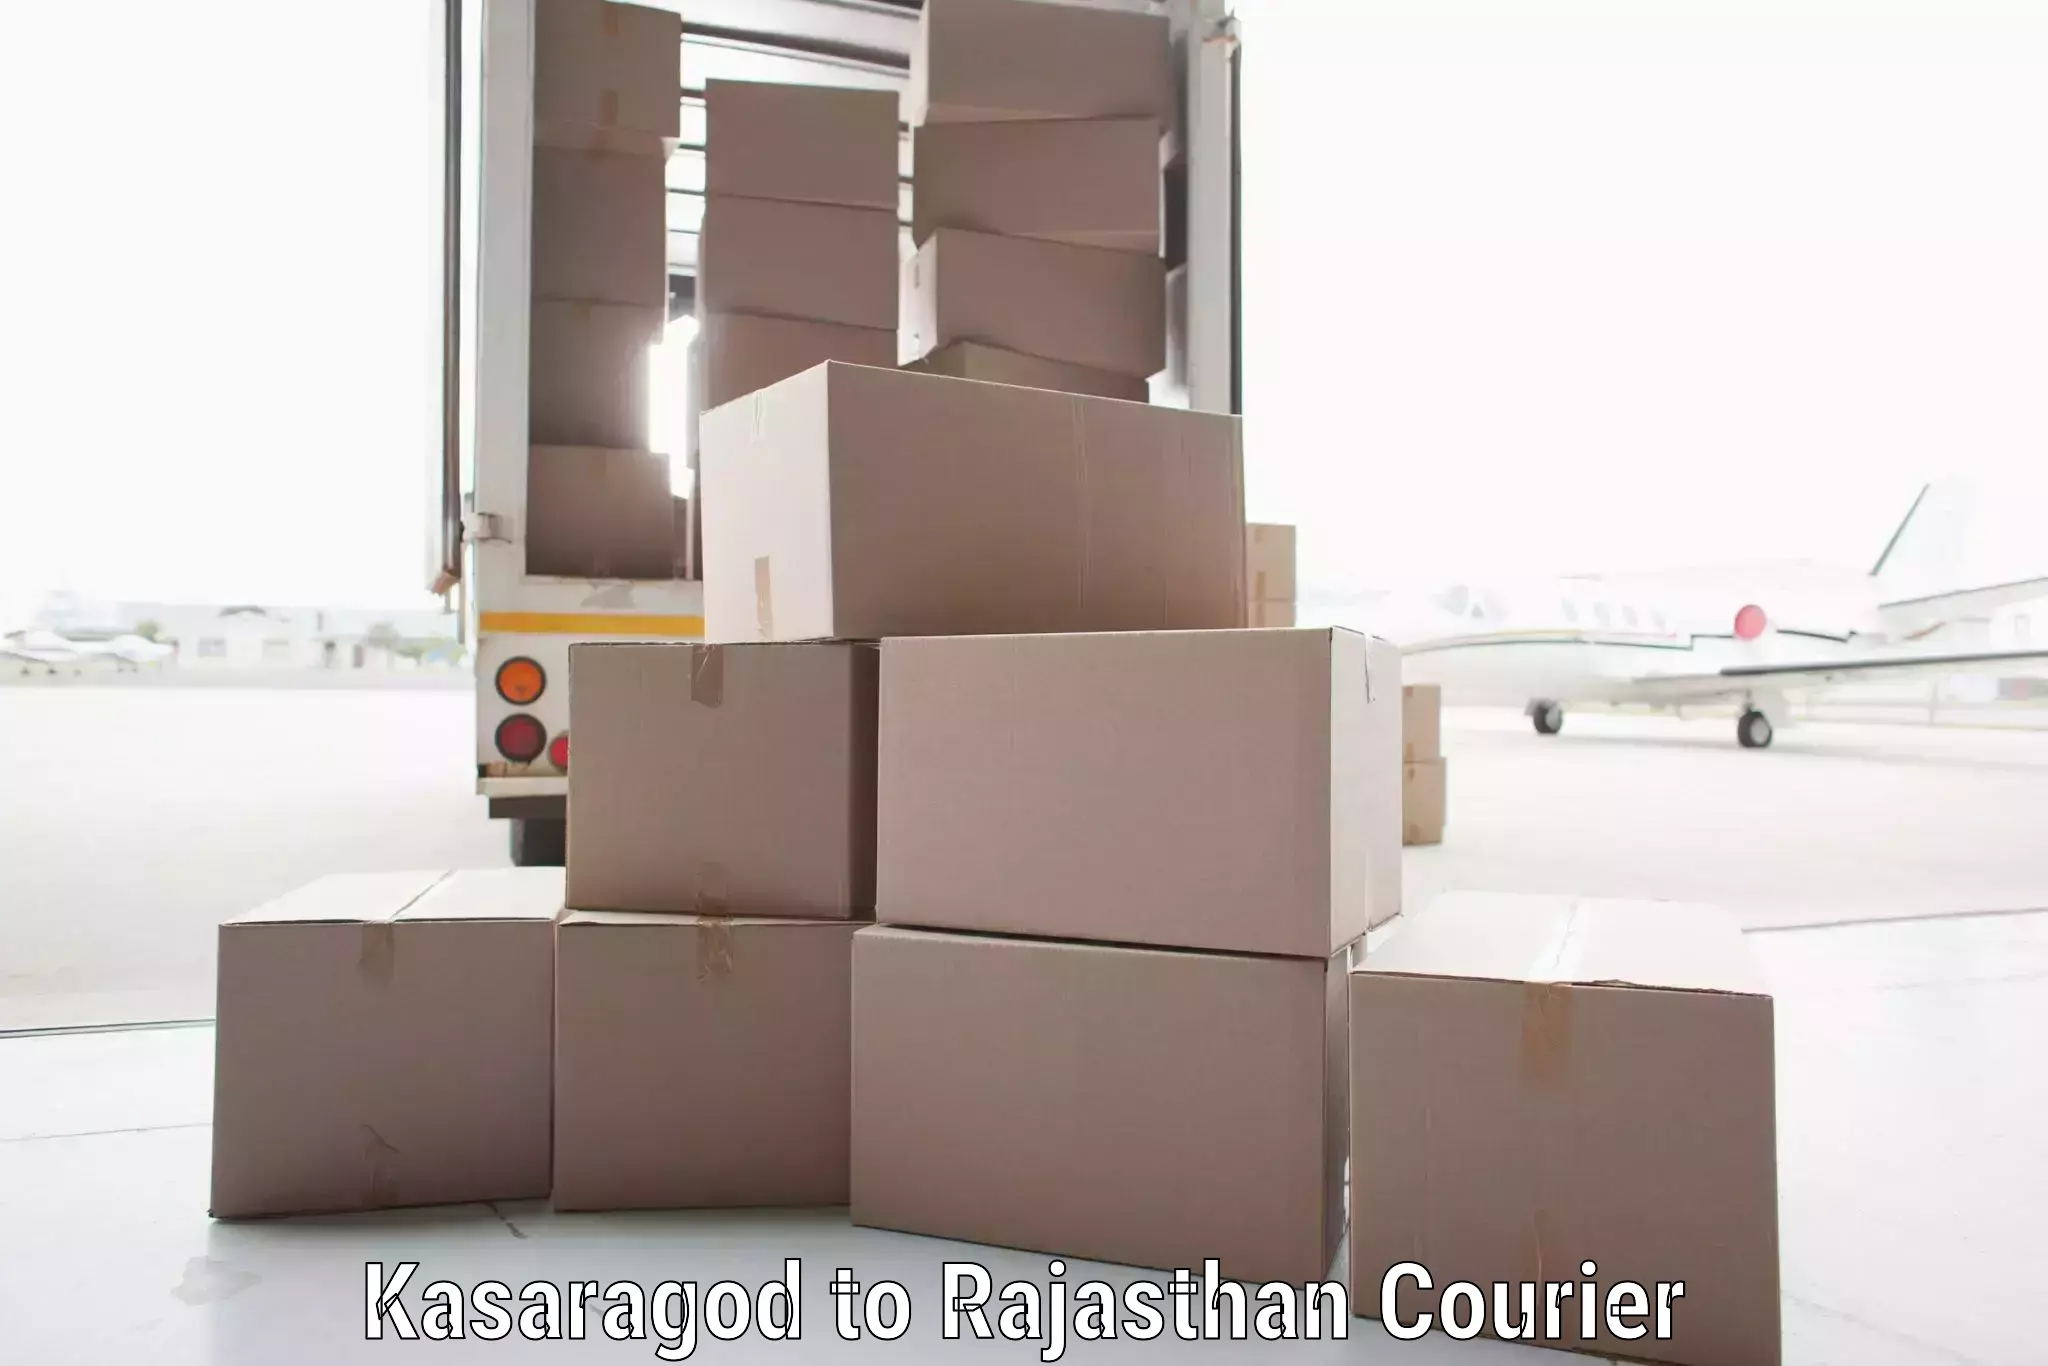 Urgent courier needs Kasaragod to Dholpur